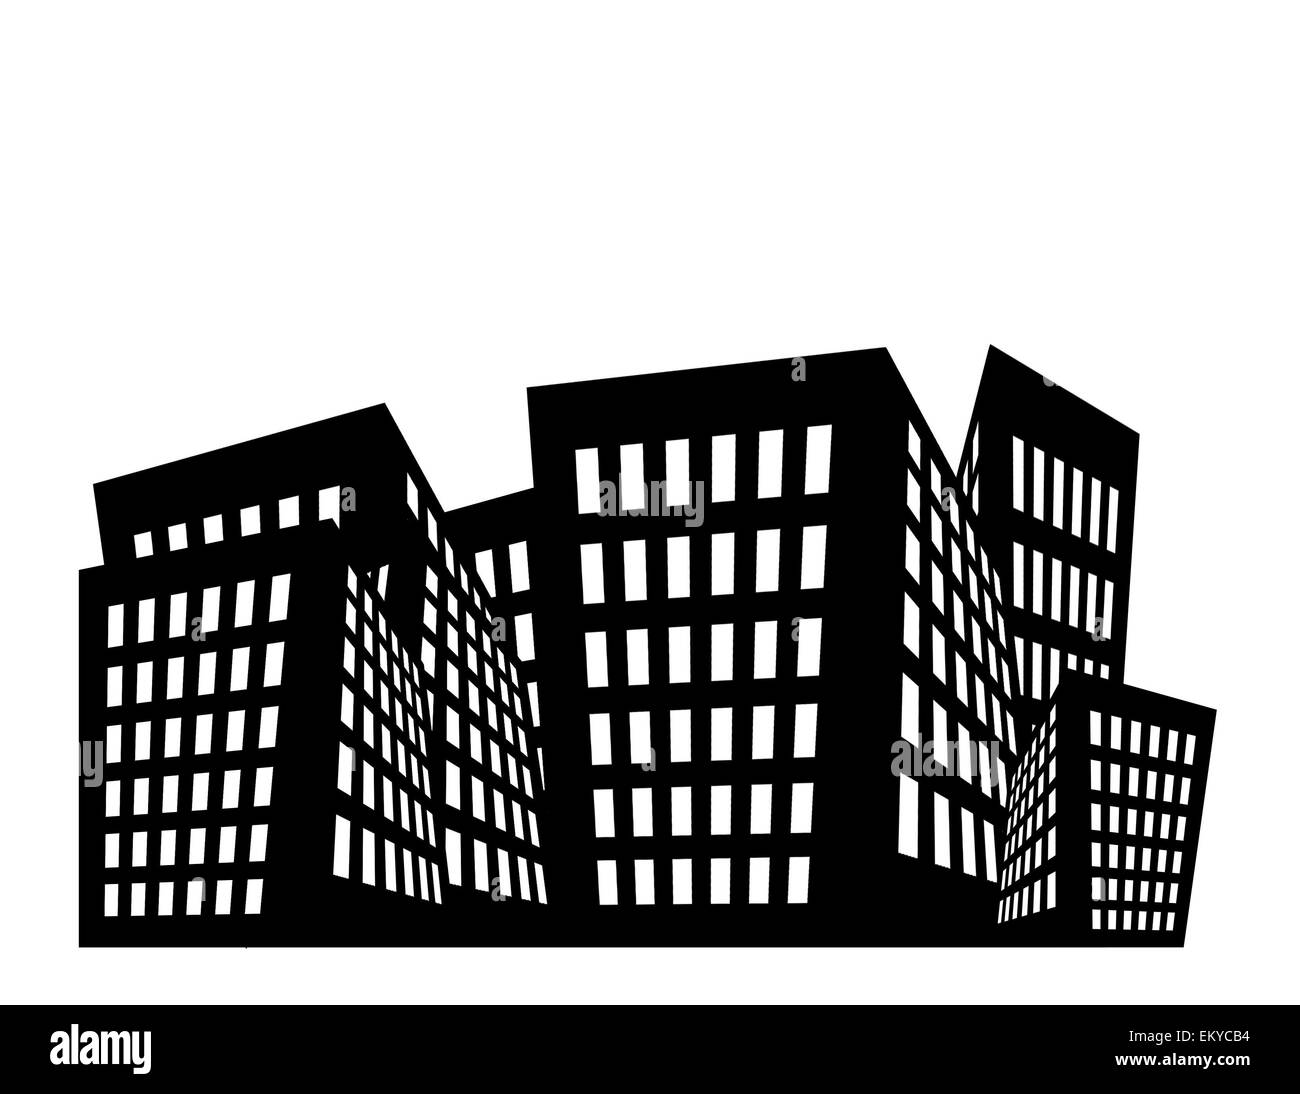 Illustration of black and white buildings with white space. Stock Photo